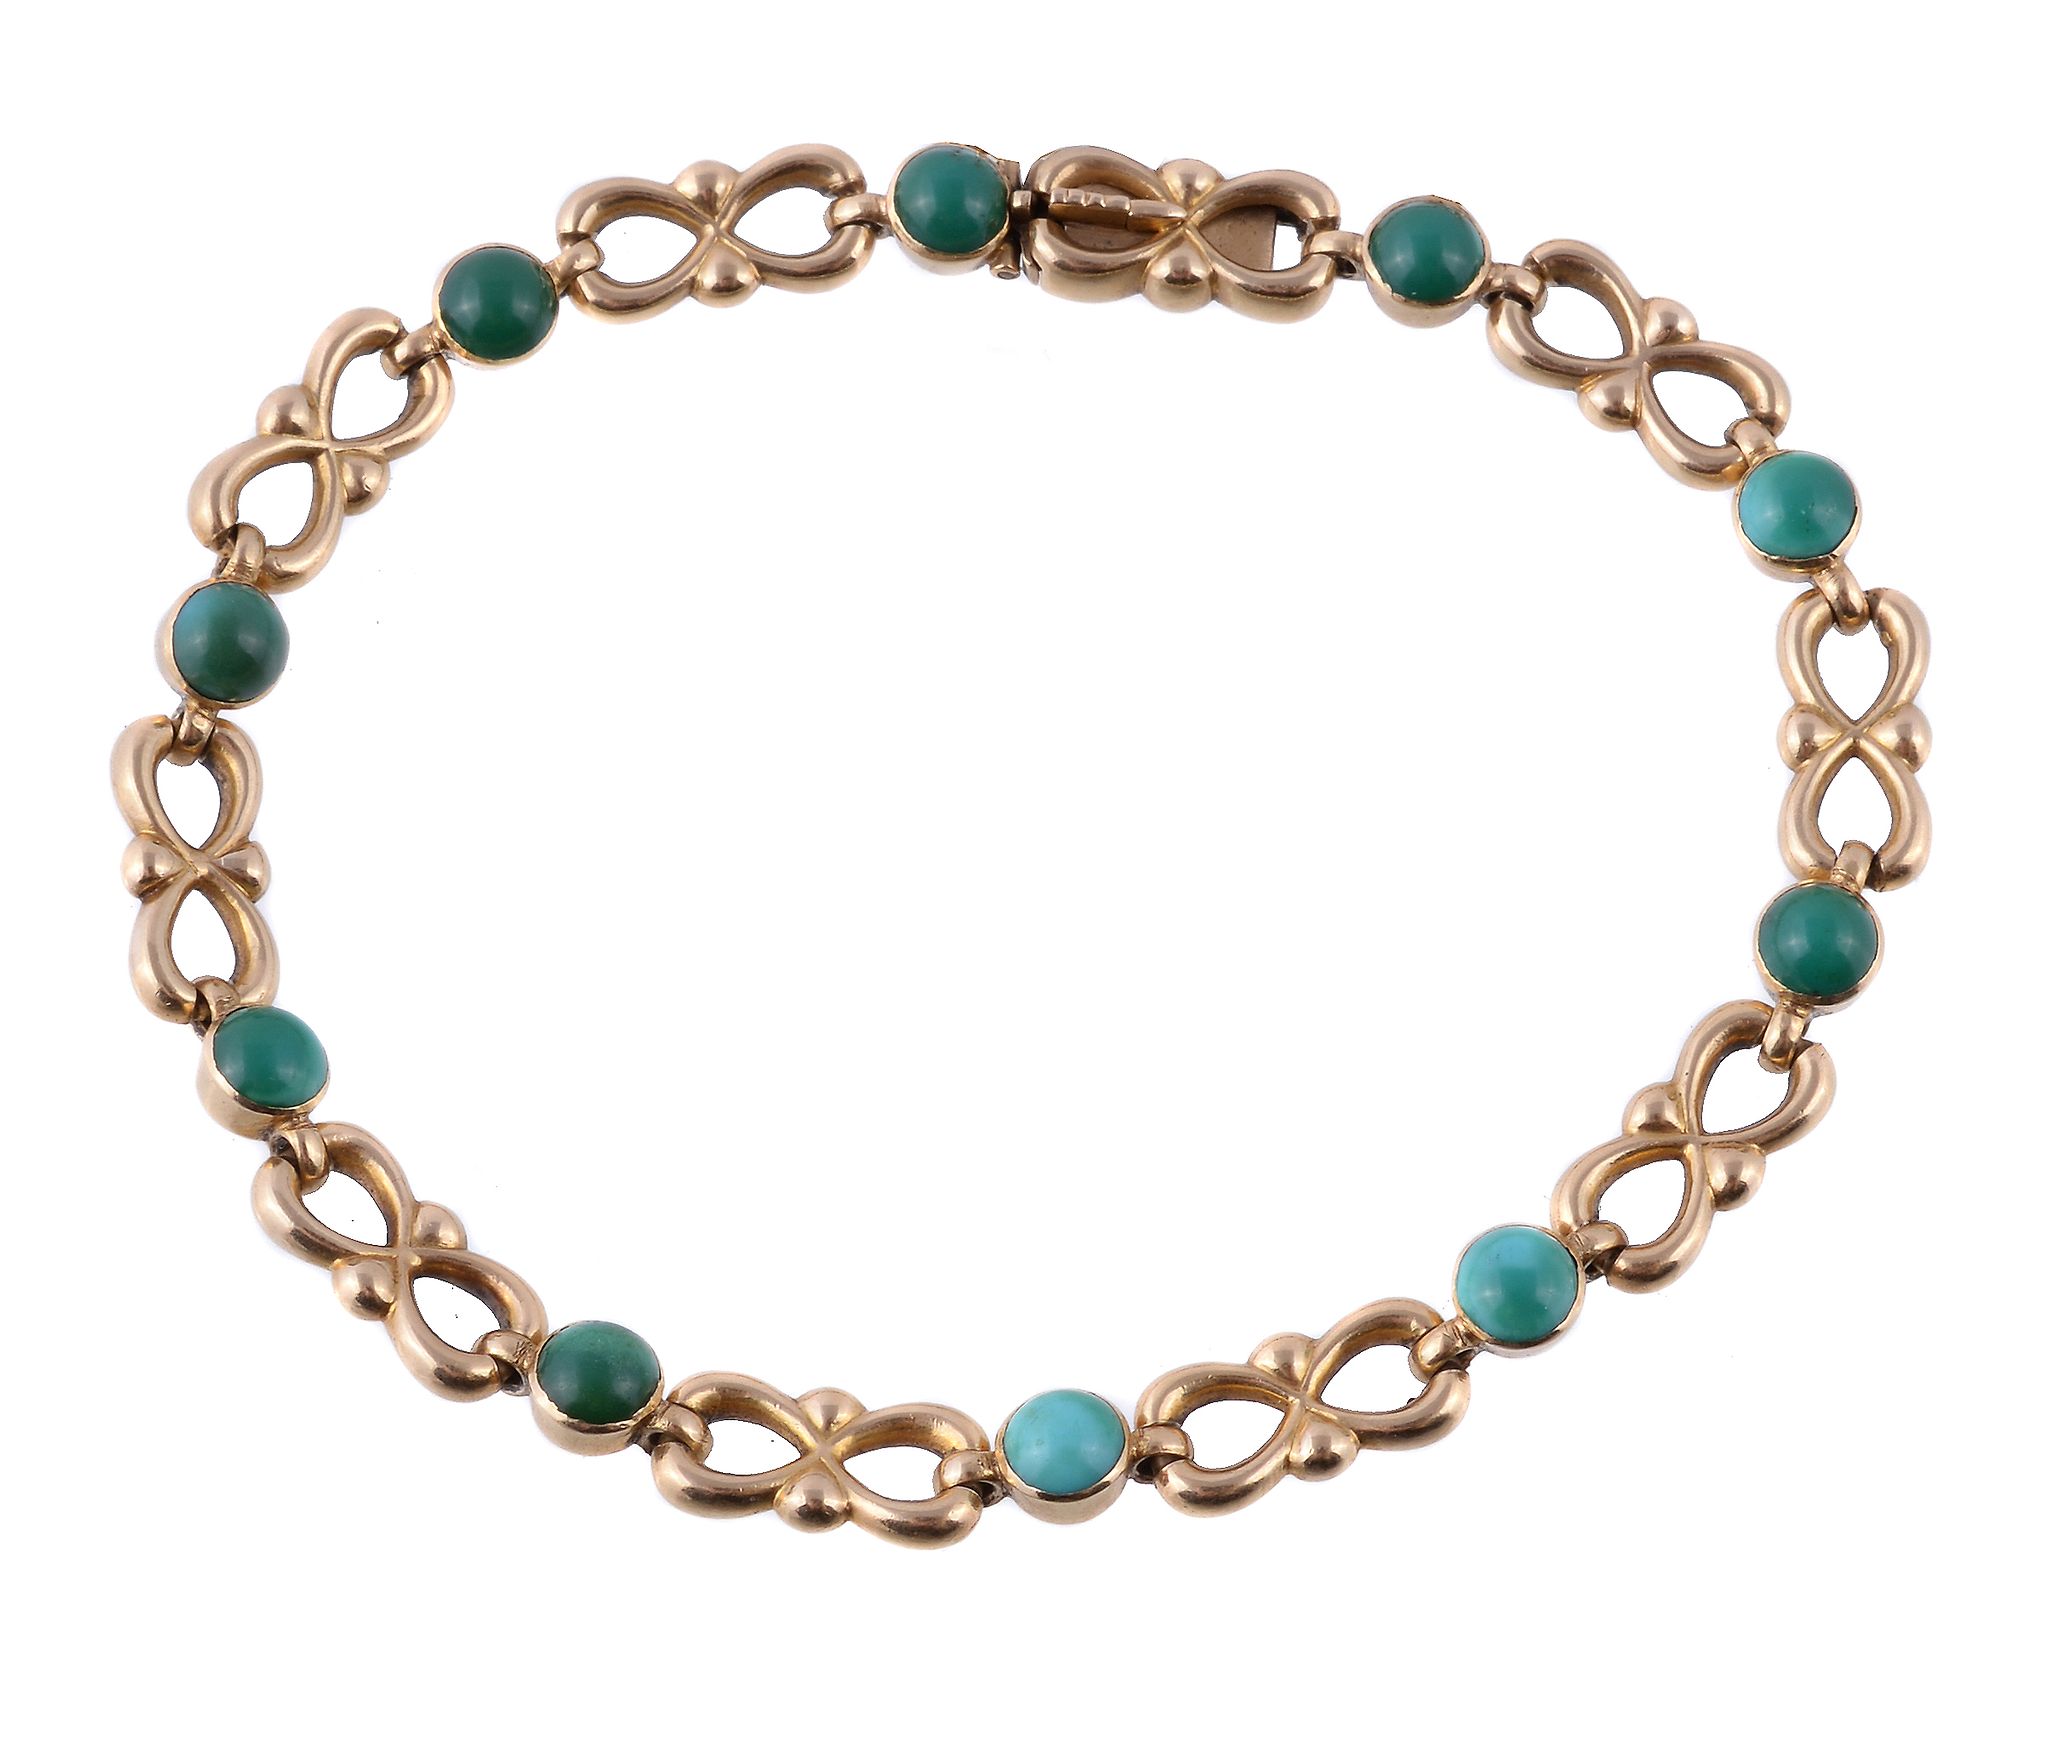 A late 19th century turquoise bracelet, circa 1880, the polished figure of eight links with